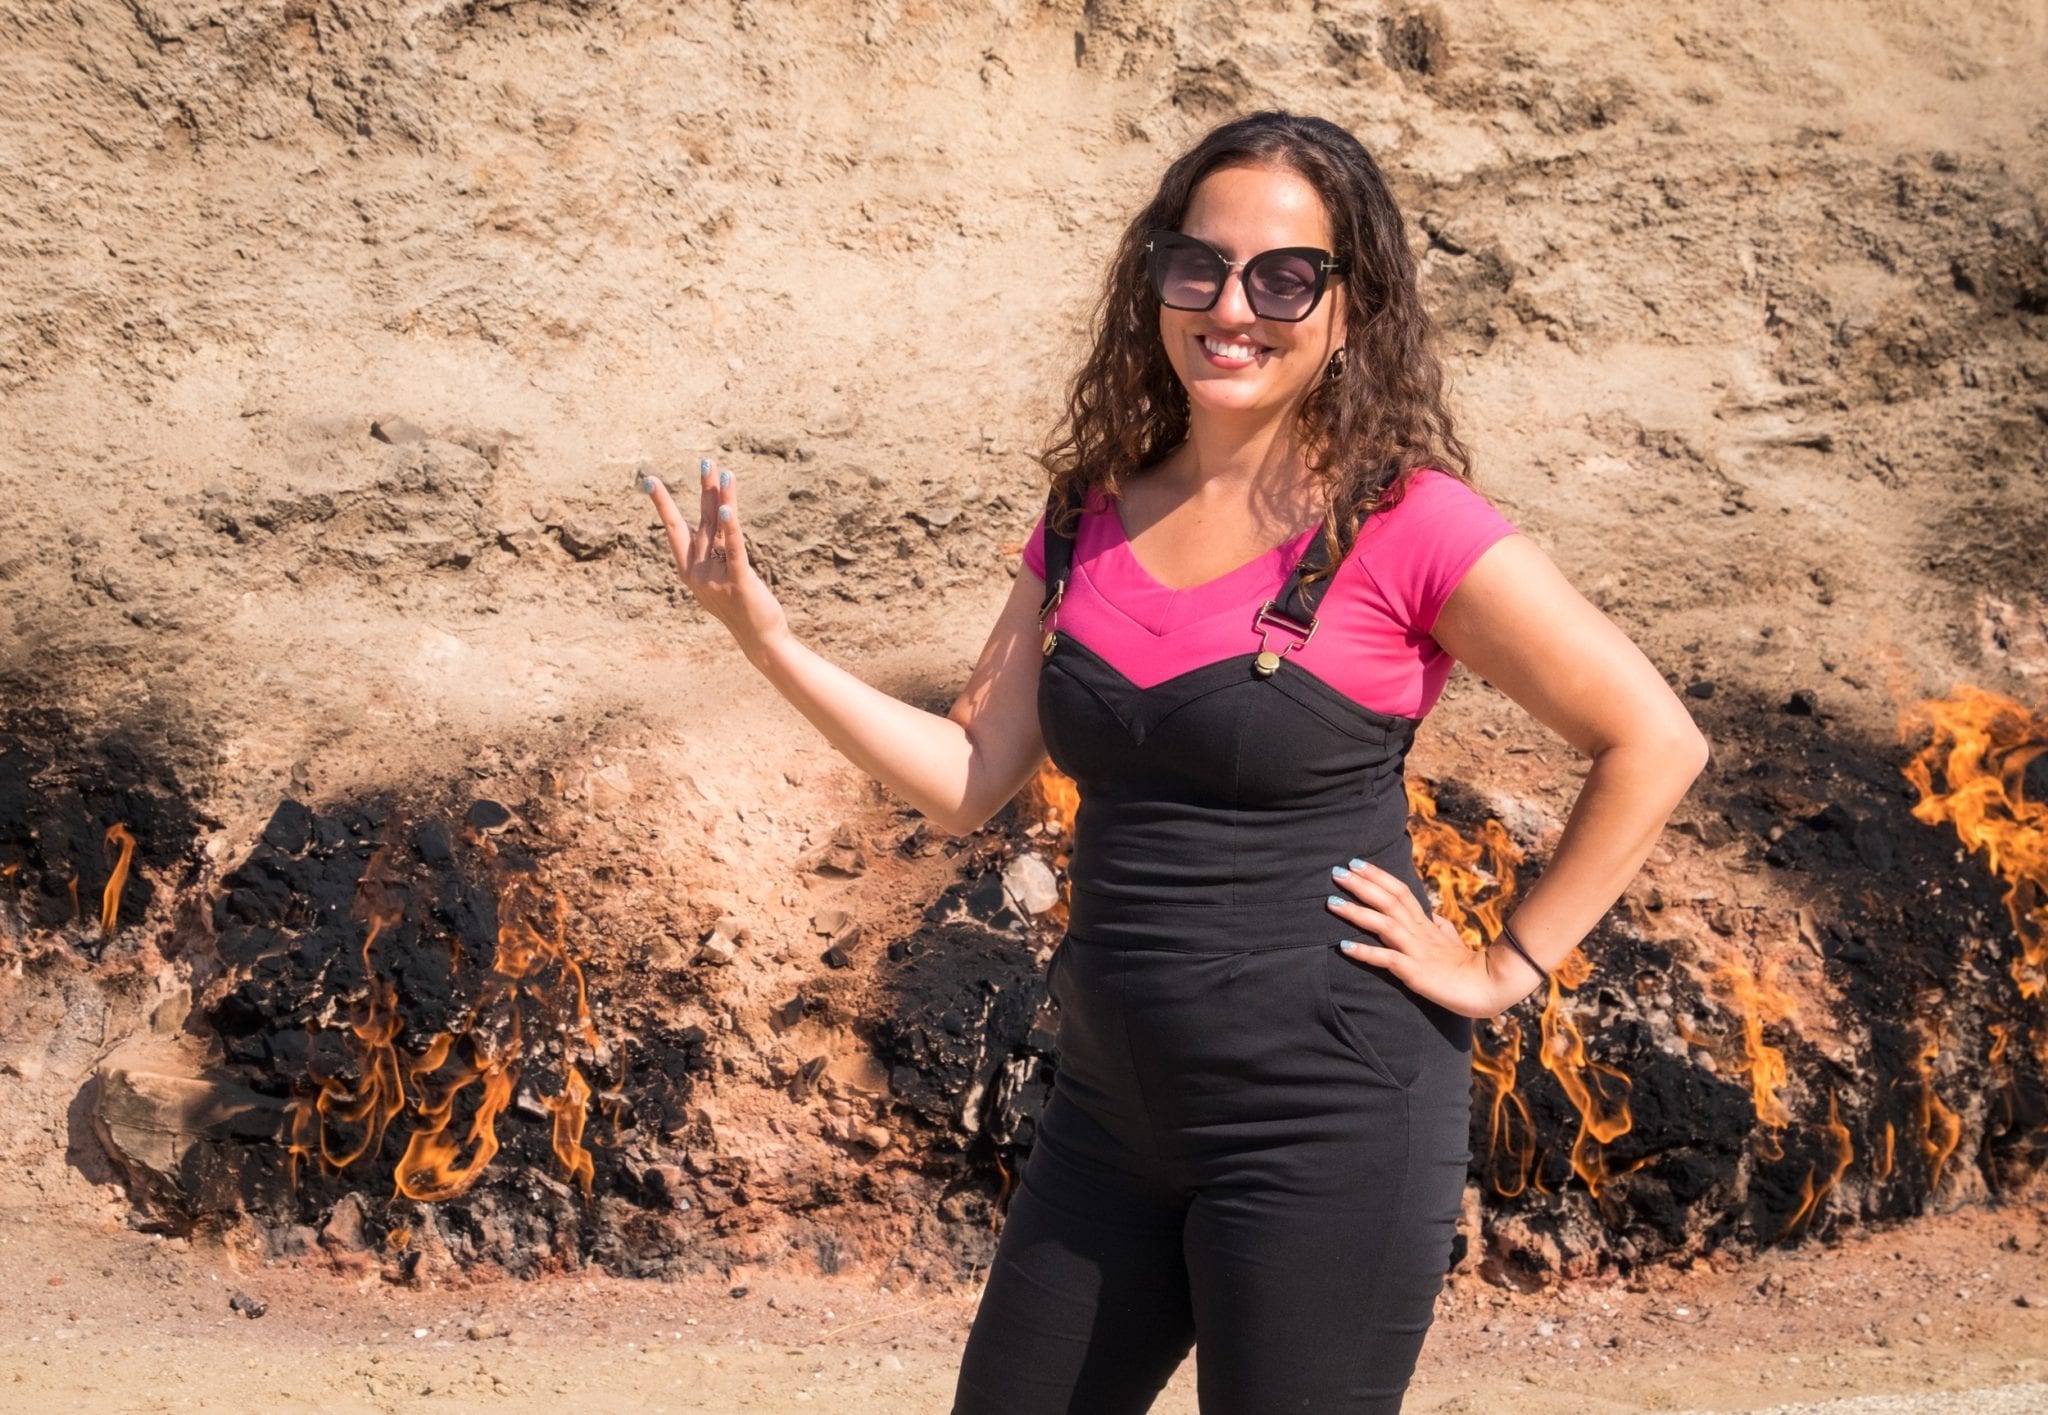 Kate stands in front of the burning ground at Yanar Dag in Azerbaijan, wearing overalls and holding her hand up and using her fingers to mimic flames.